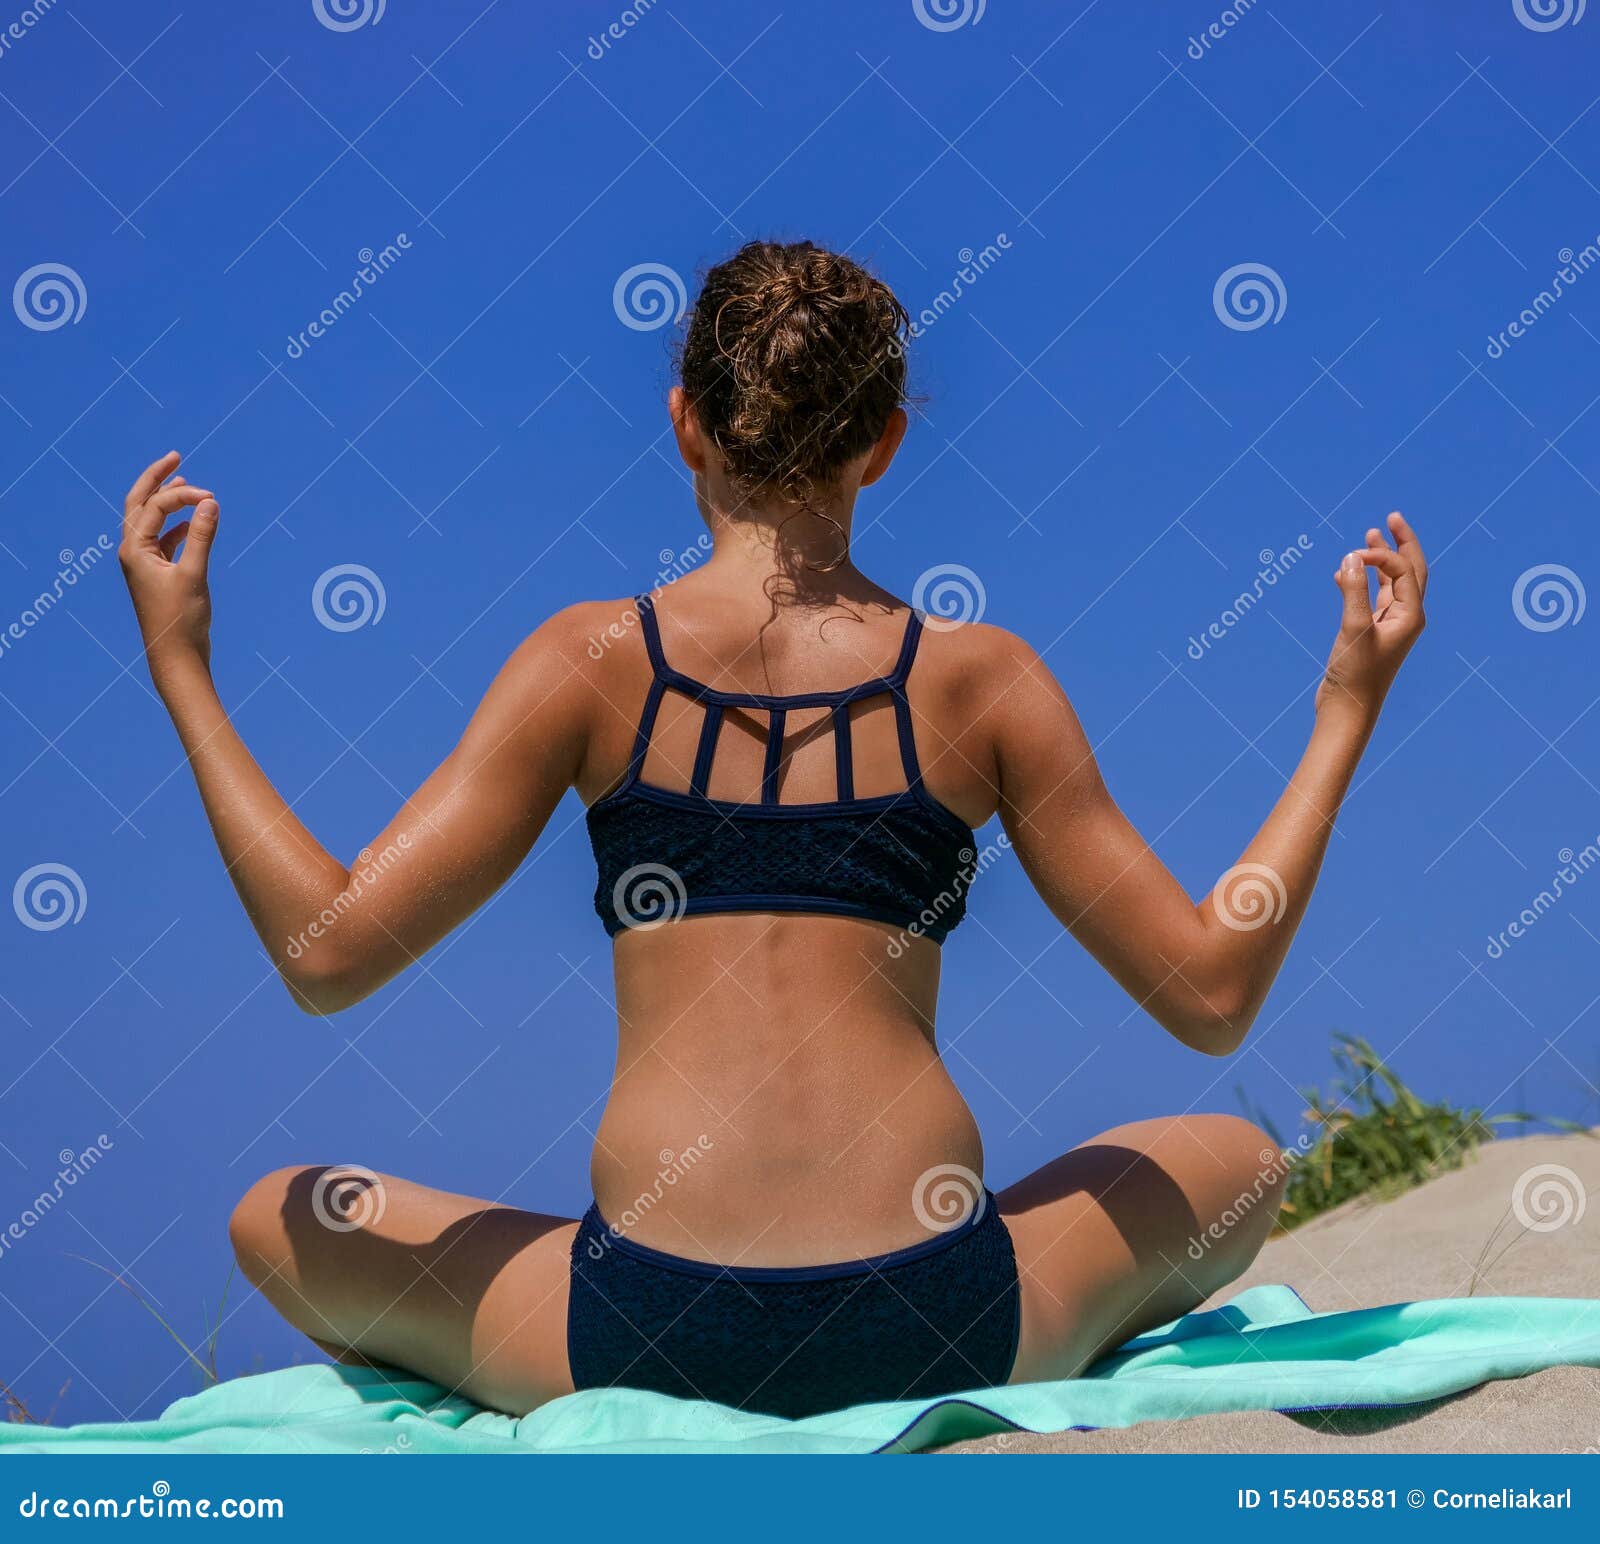 Slim and Athletic Girl in a Black Bikini Doing Yoga Pose, Calisthenics,  Fitness Training, Workout on a Beach with Blue Sky, Stock Image - Image of  back, relaxed: 154058581